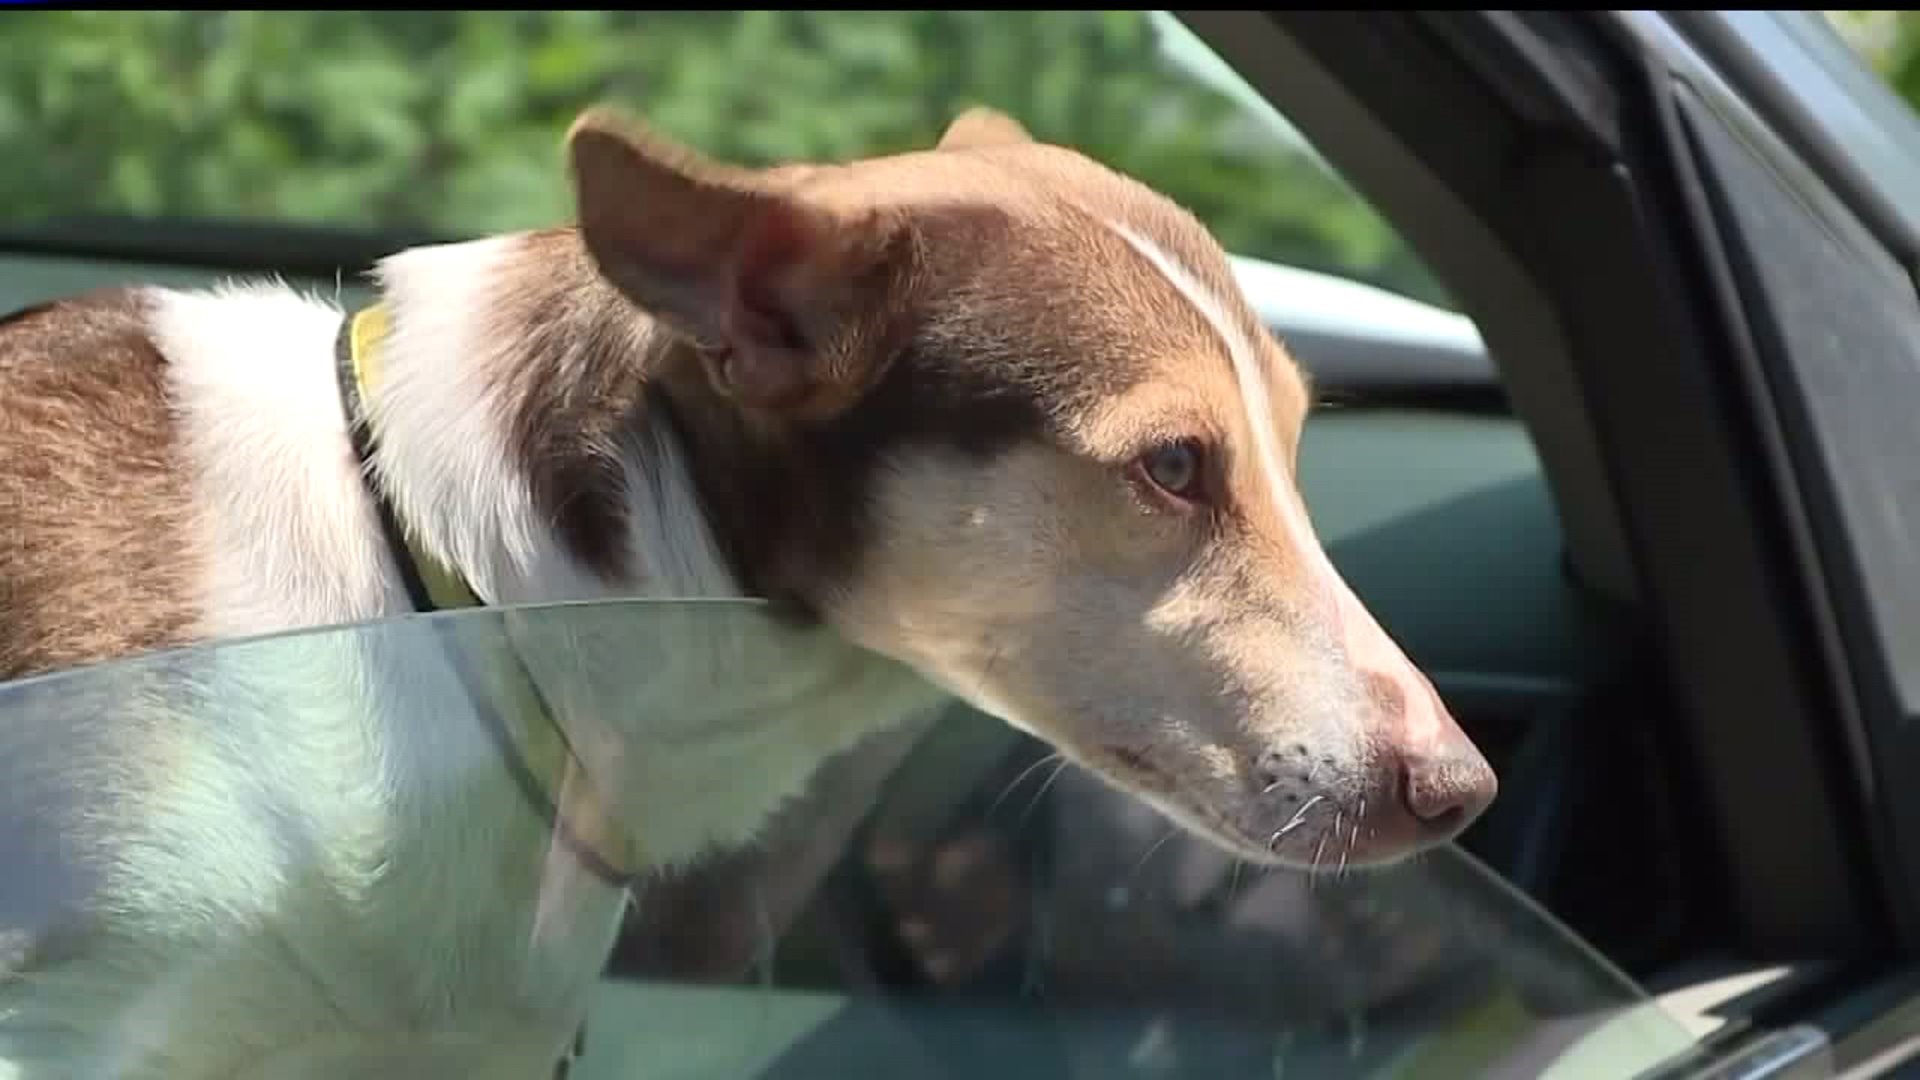 Vet warns against leaving pets in hot cars, legislation would protect first responders who rescue those animals